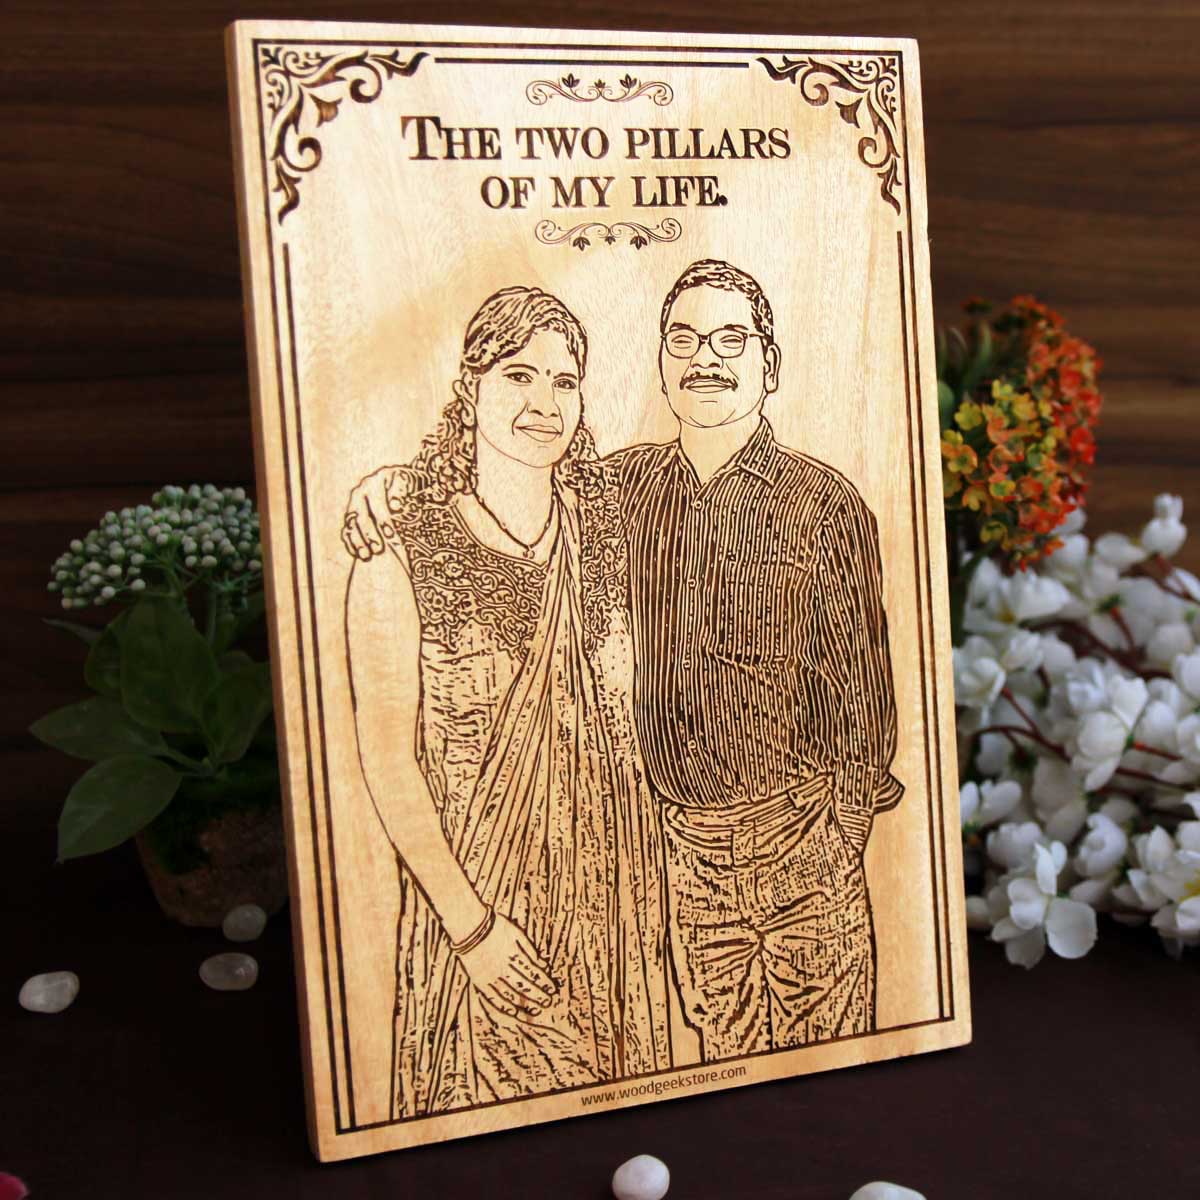 Amazon.com: Mr & Mrs wood Personalized Frame, Custom Engraved Wood Picture  Frame, Gift For Family, Wedding Frame, Newlywed Gift, 4x6, 5x7,8x10 :  Handmade Products